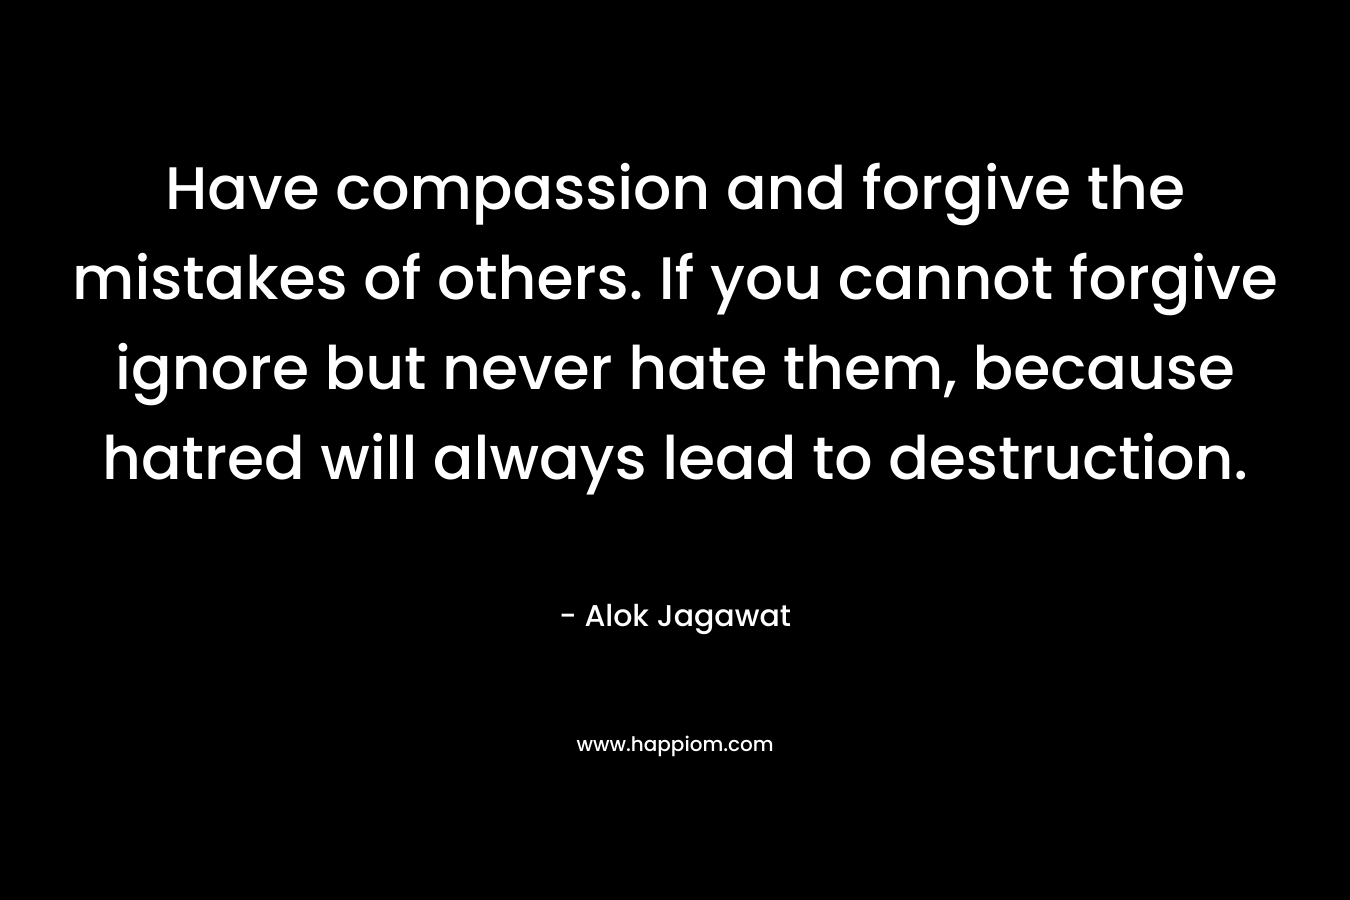 Have compassion and forgive the mistakes of others. If you cannot forgive ignore but never hate them, because hatred will always lead to destruction.